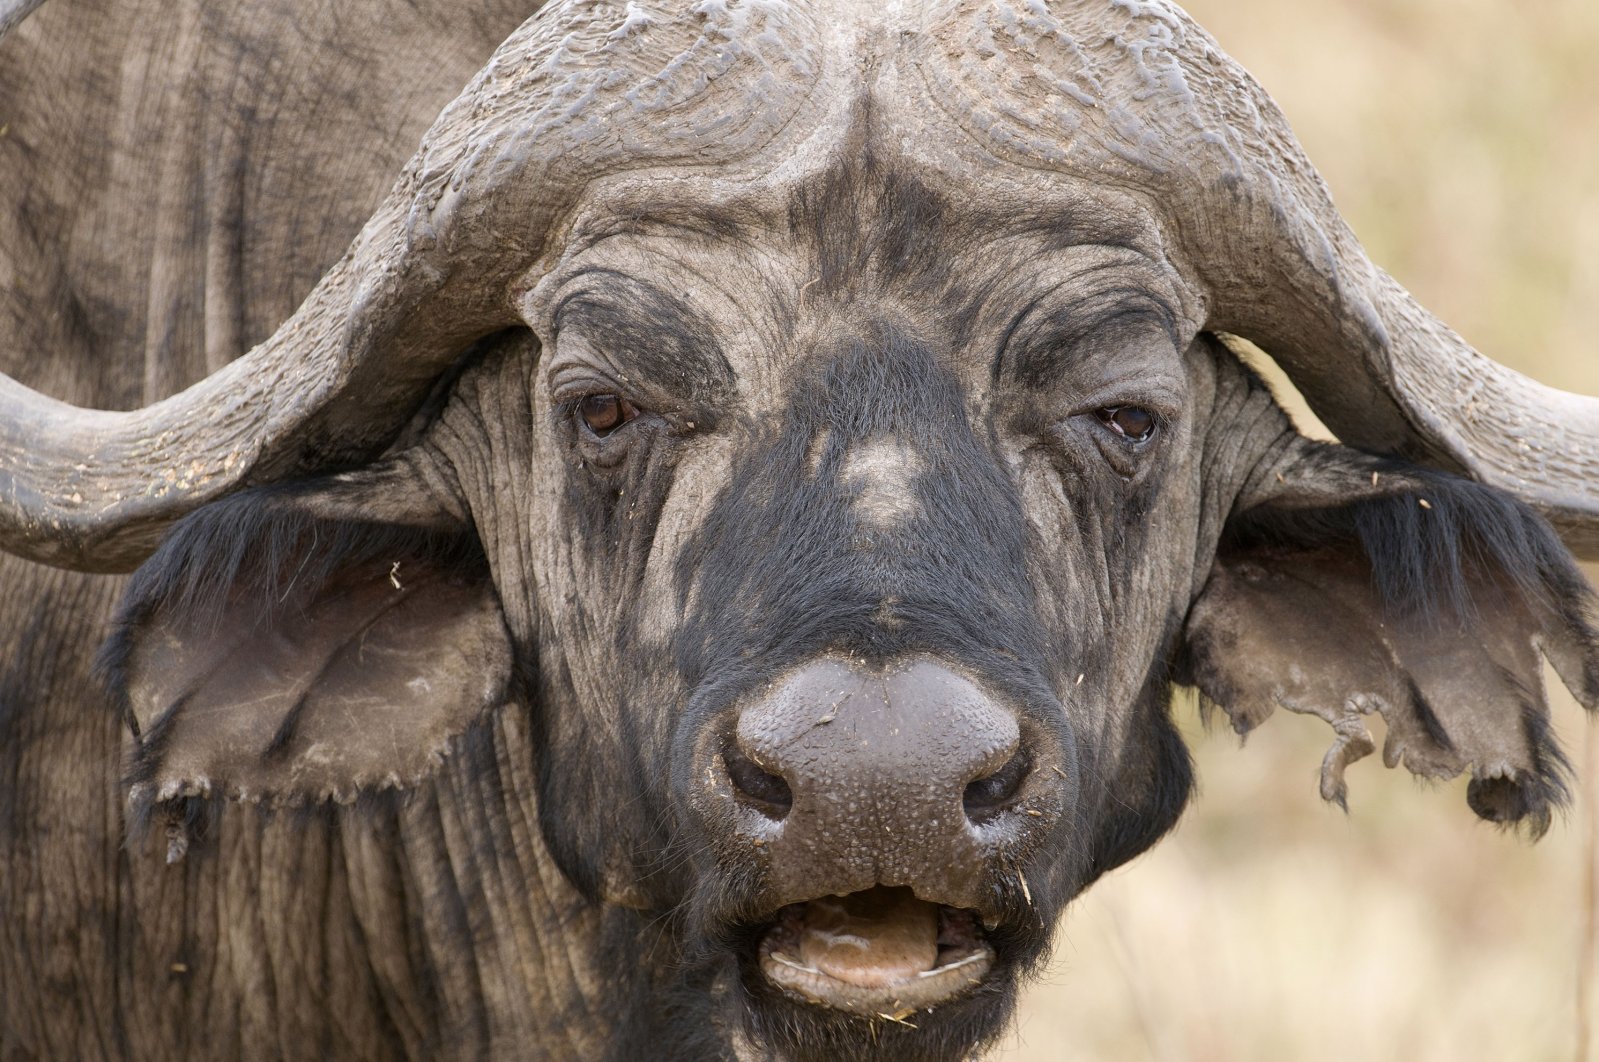 A cape buffalo resembles a prize fighter after a particularly nasty fight, worn, haggard, ears torn, Lake Manyara National Park, Tanzania. (Shutterstock Photo)